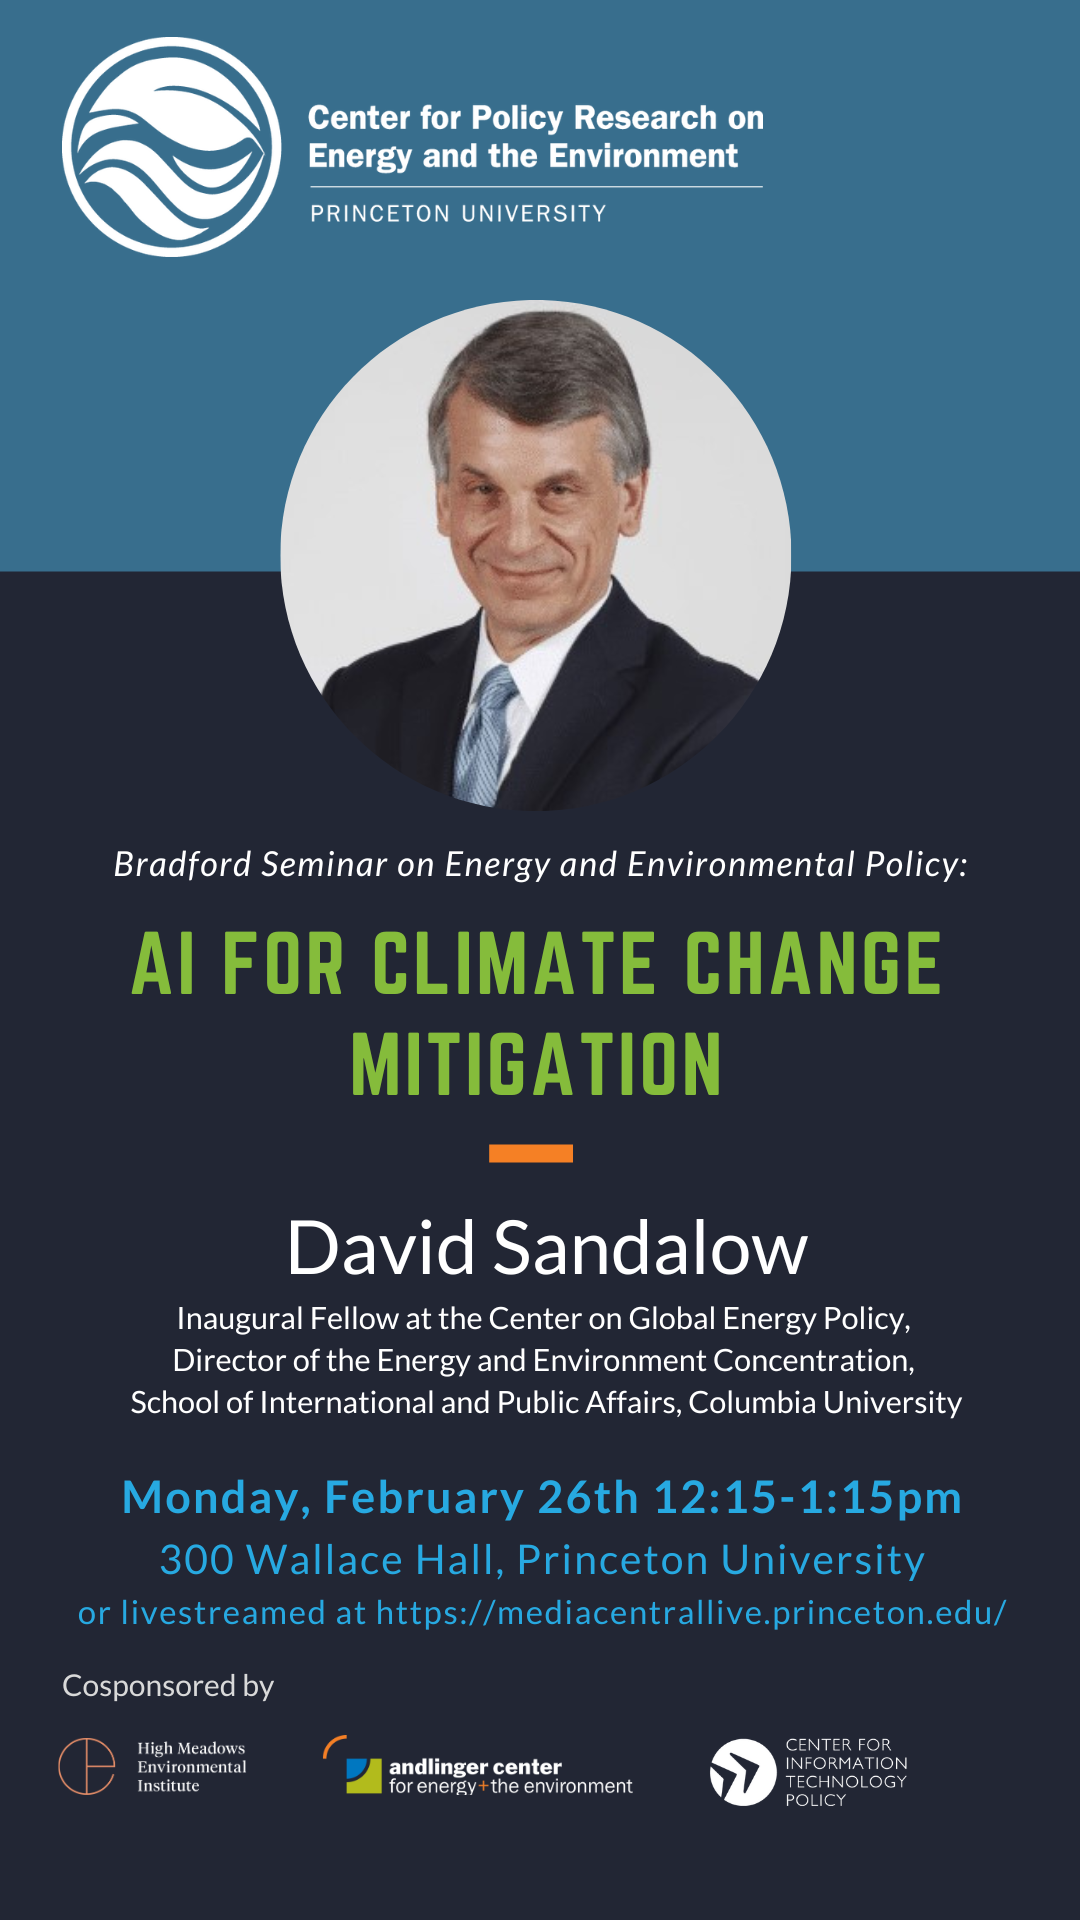 Poster for Sandalow event